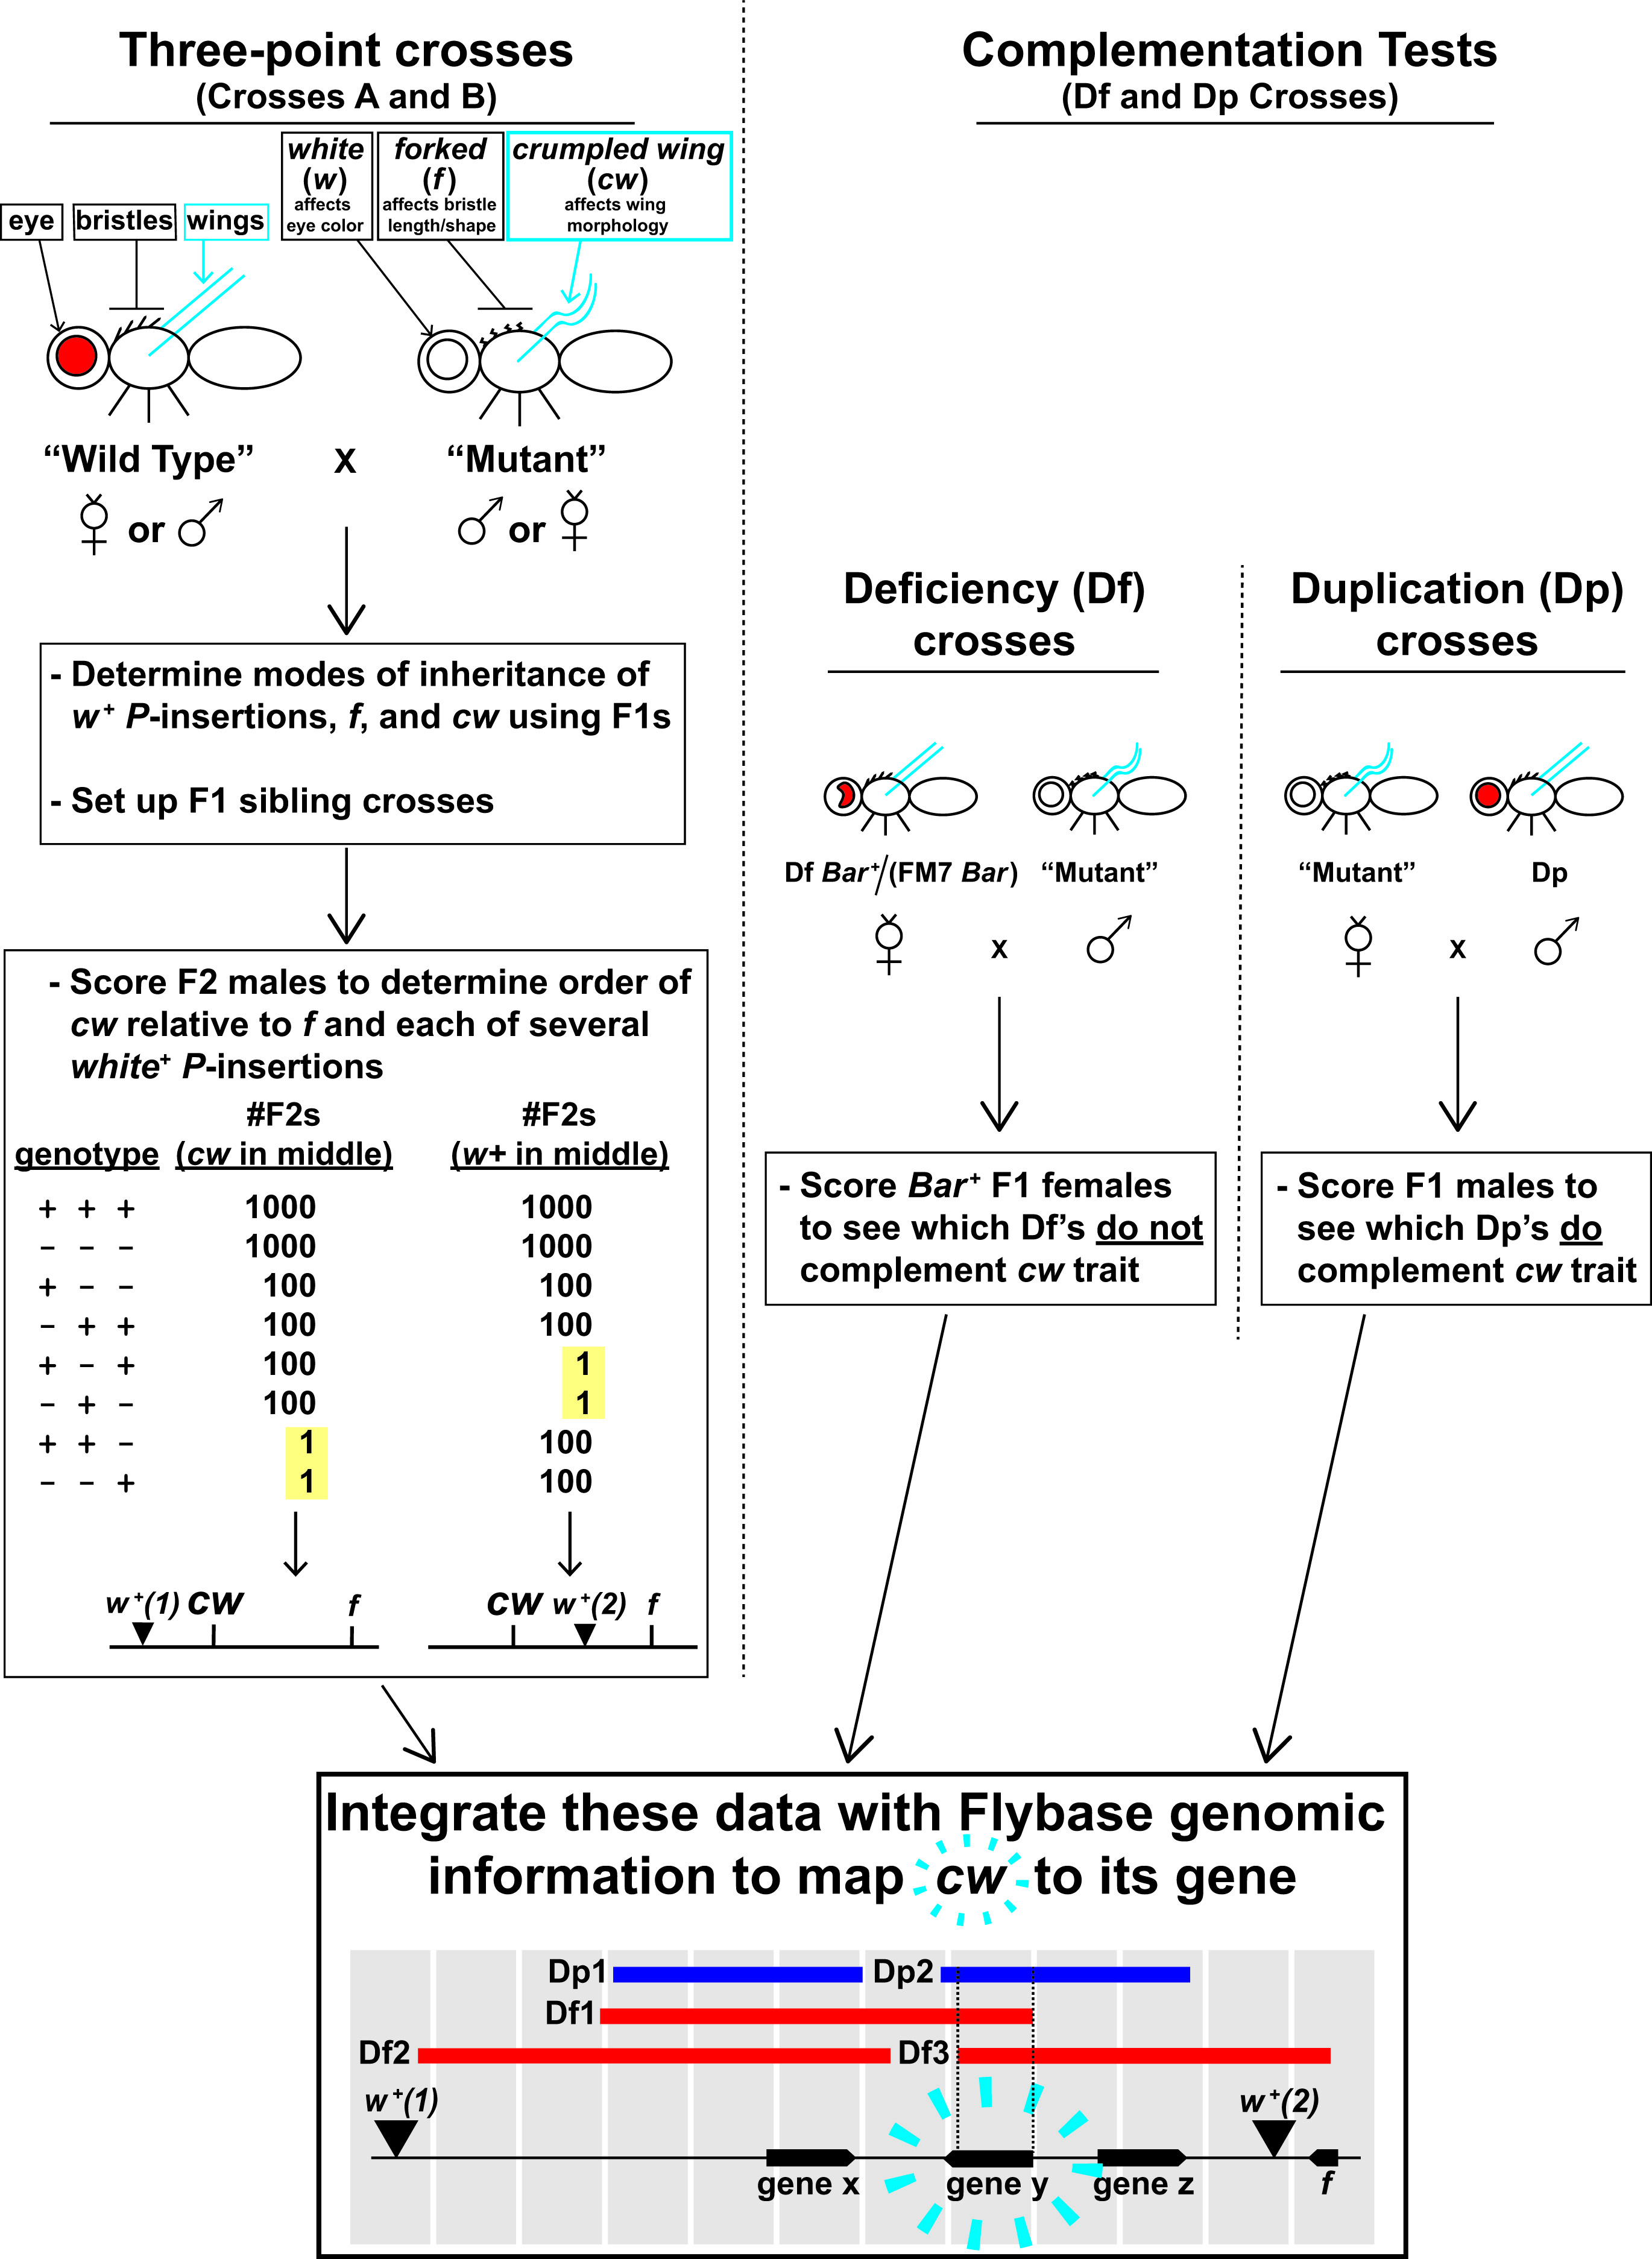 Figure 2. Overview of Fly Lab experiments. 